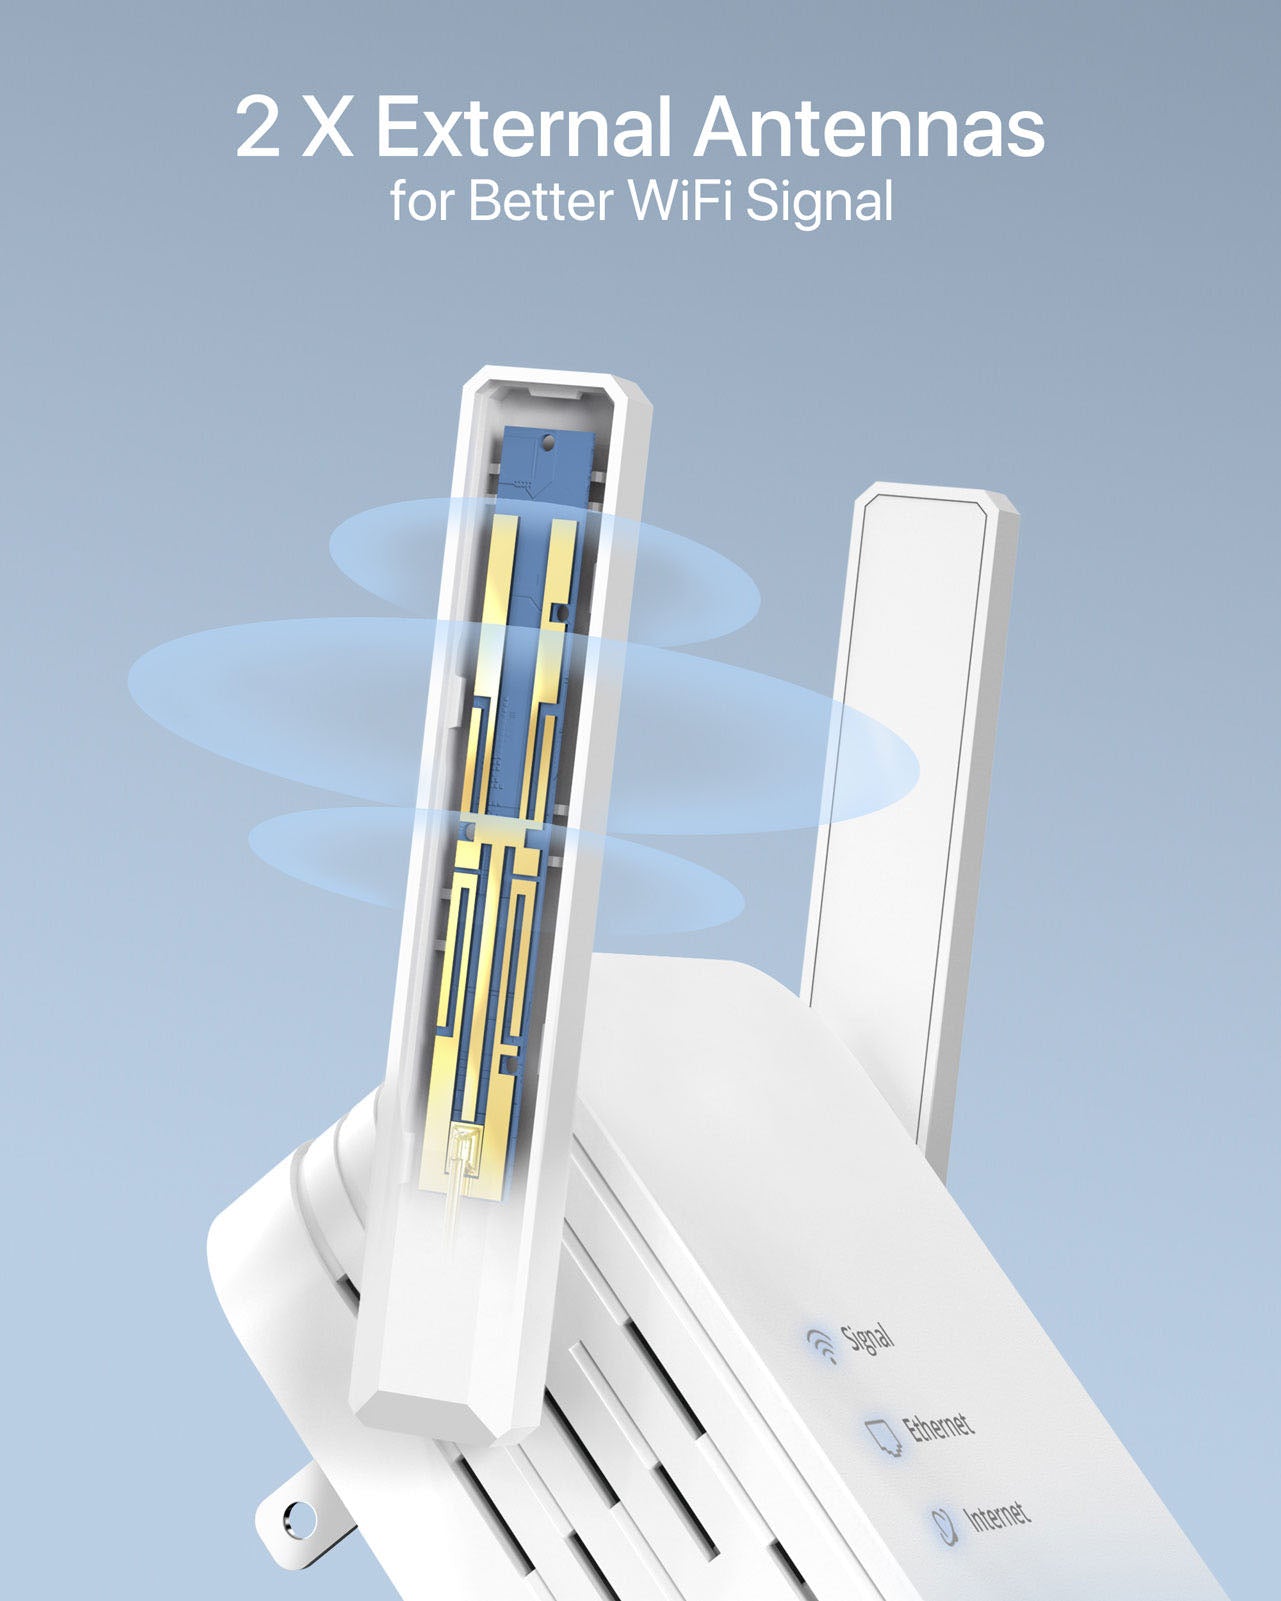 1200Mbps WiFi Access Point Comes with 2 Pieces of External Antennas Boost Stronger WiFi Signals to Remote Areas Beyond Your Router's WiFi Reach